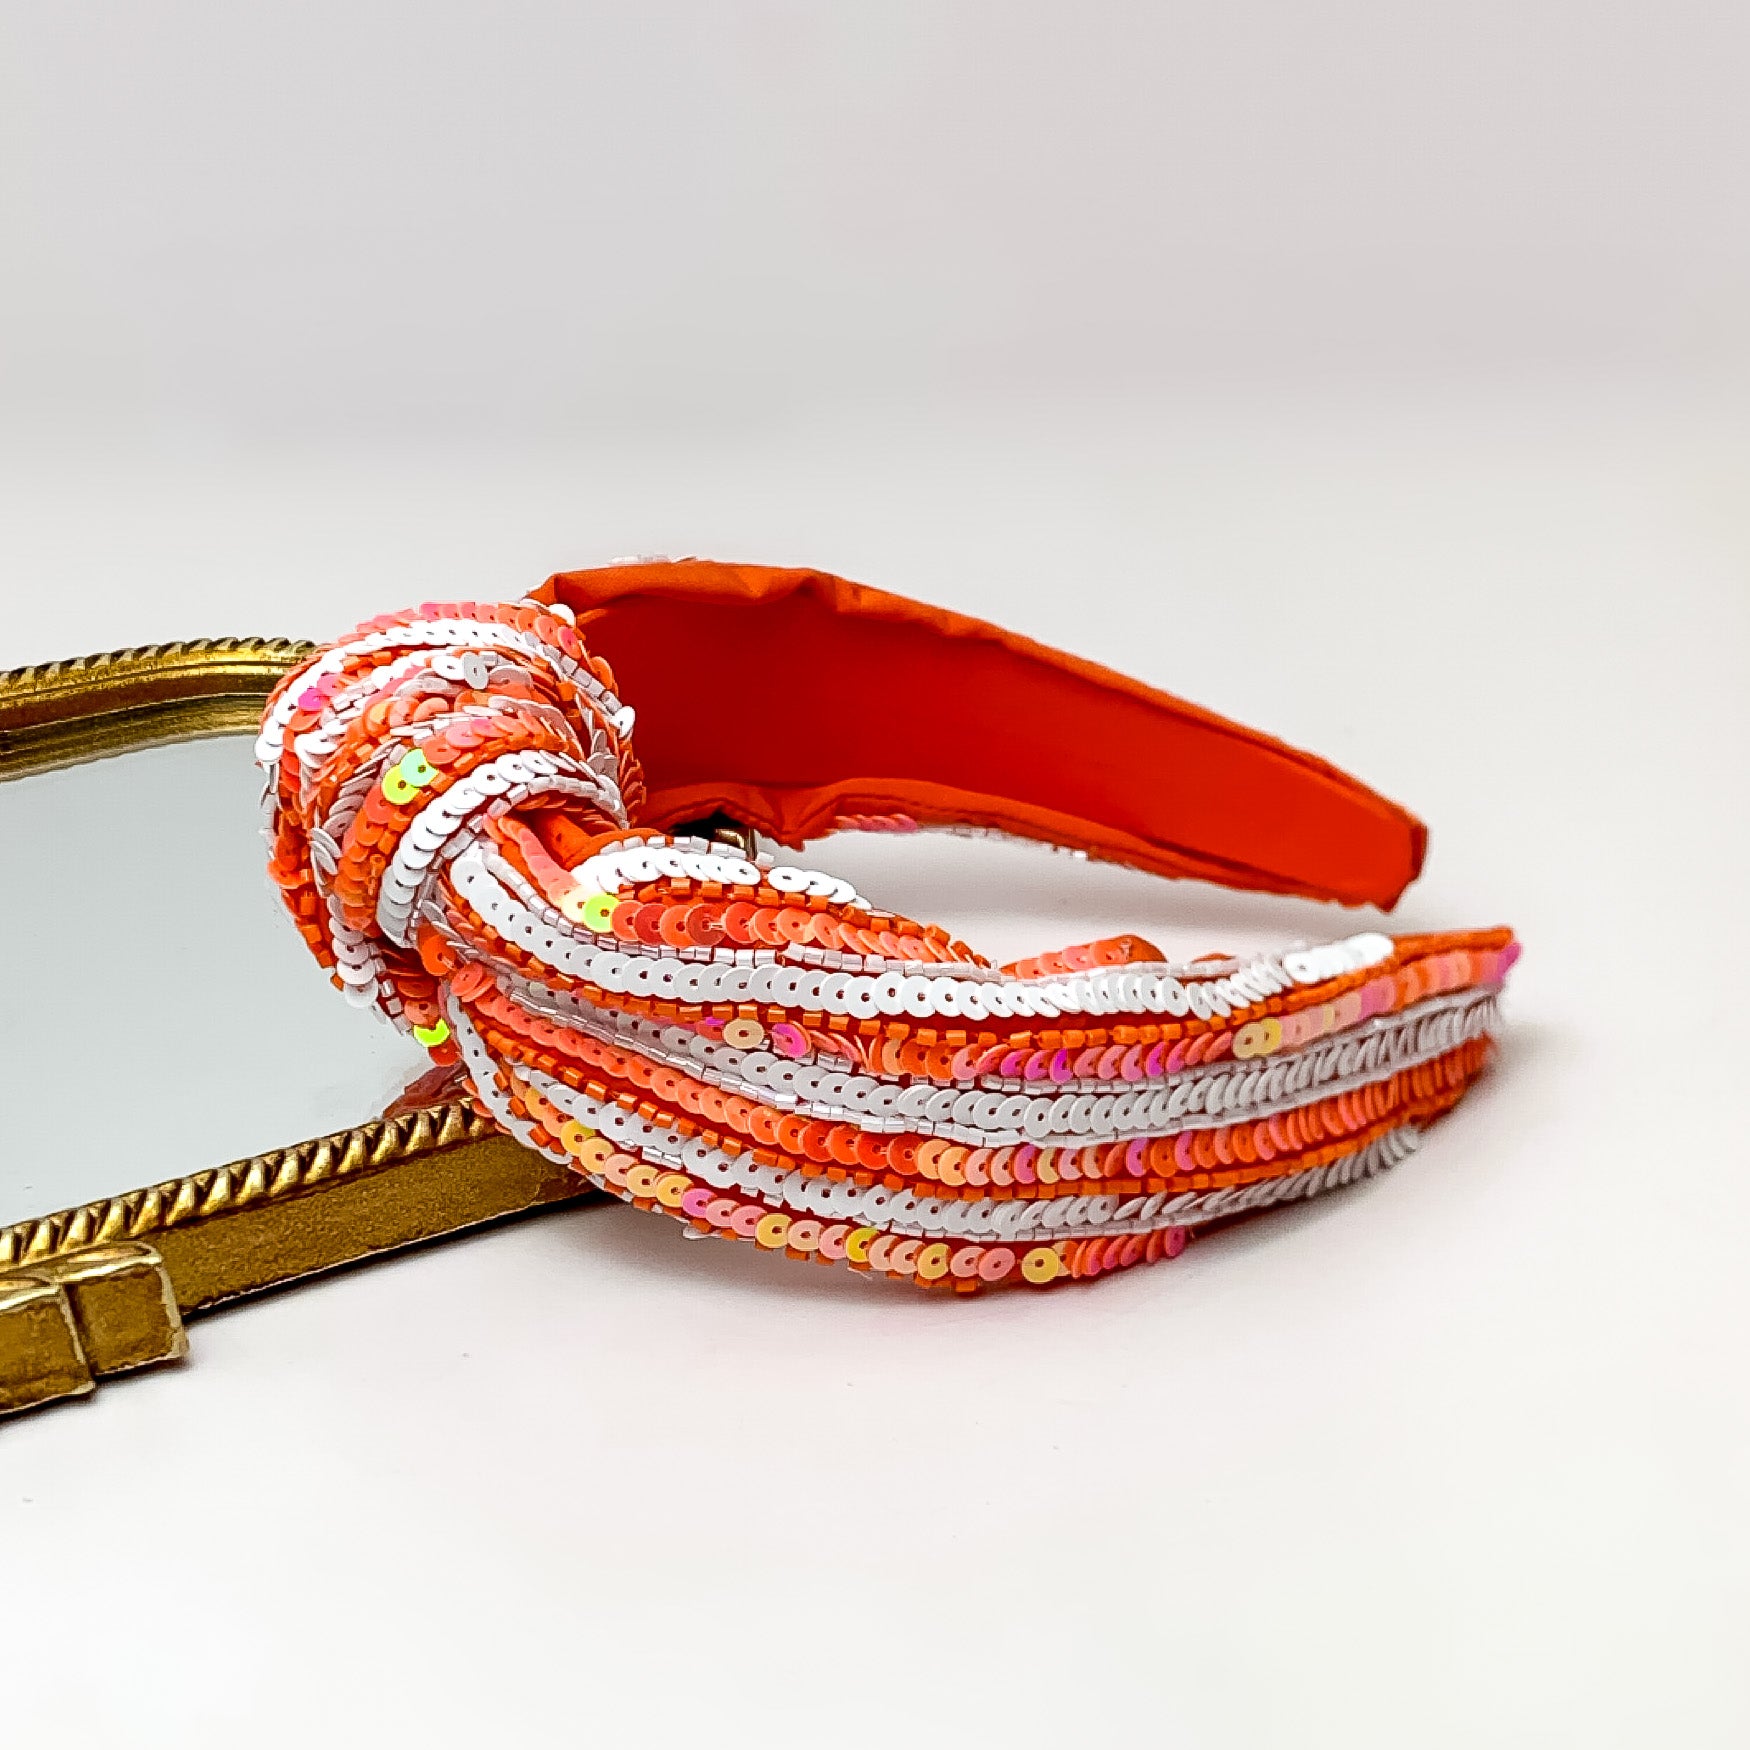 Striped Large Knot Headband in Orange and White